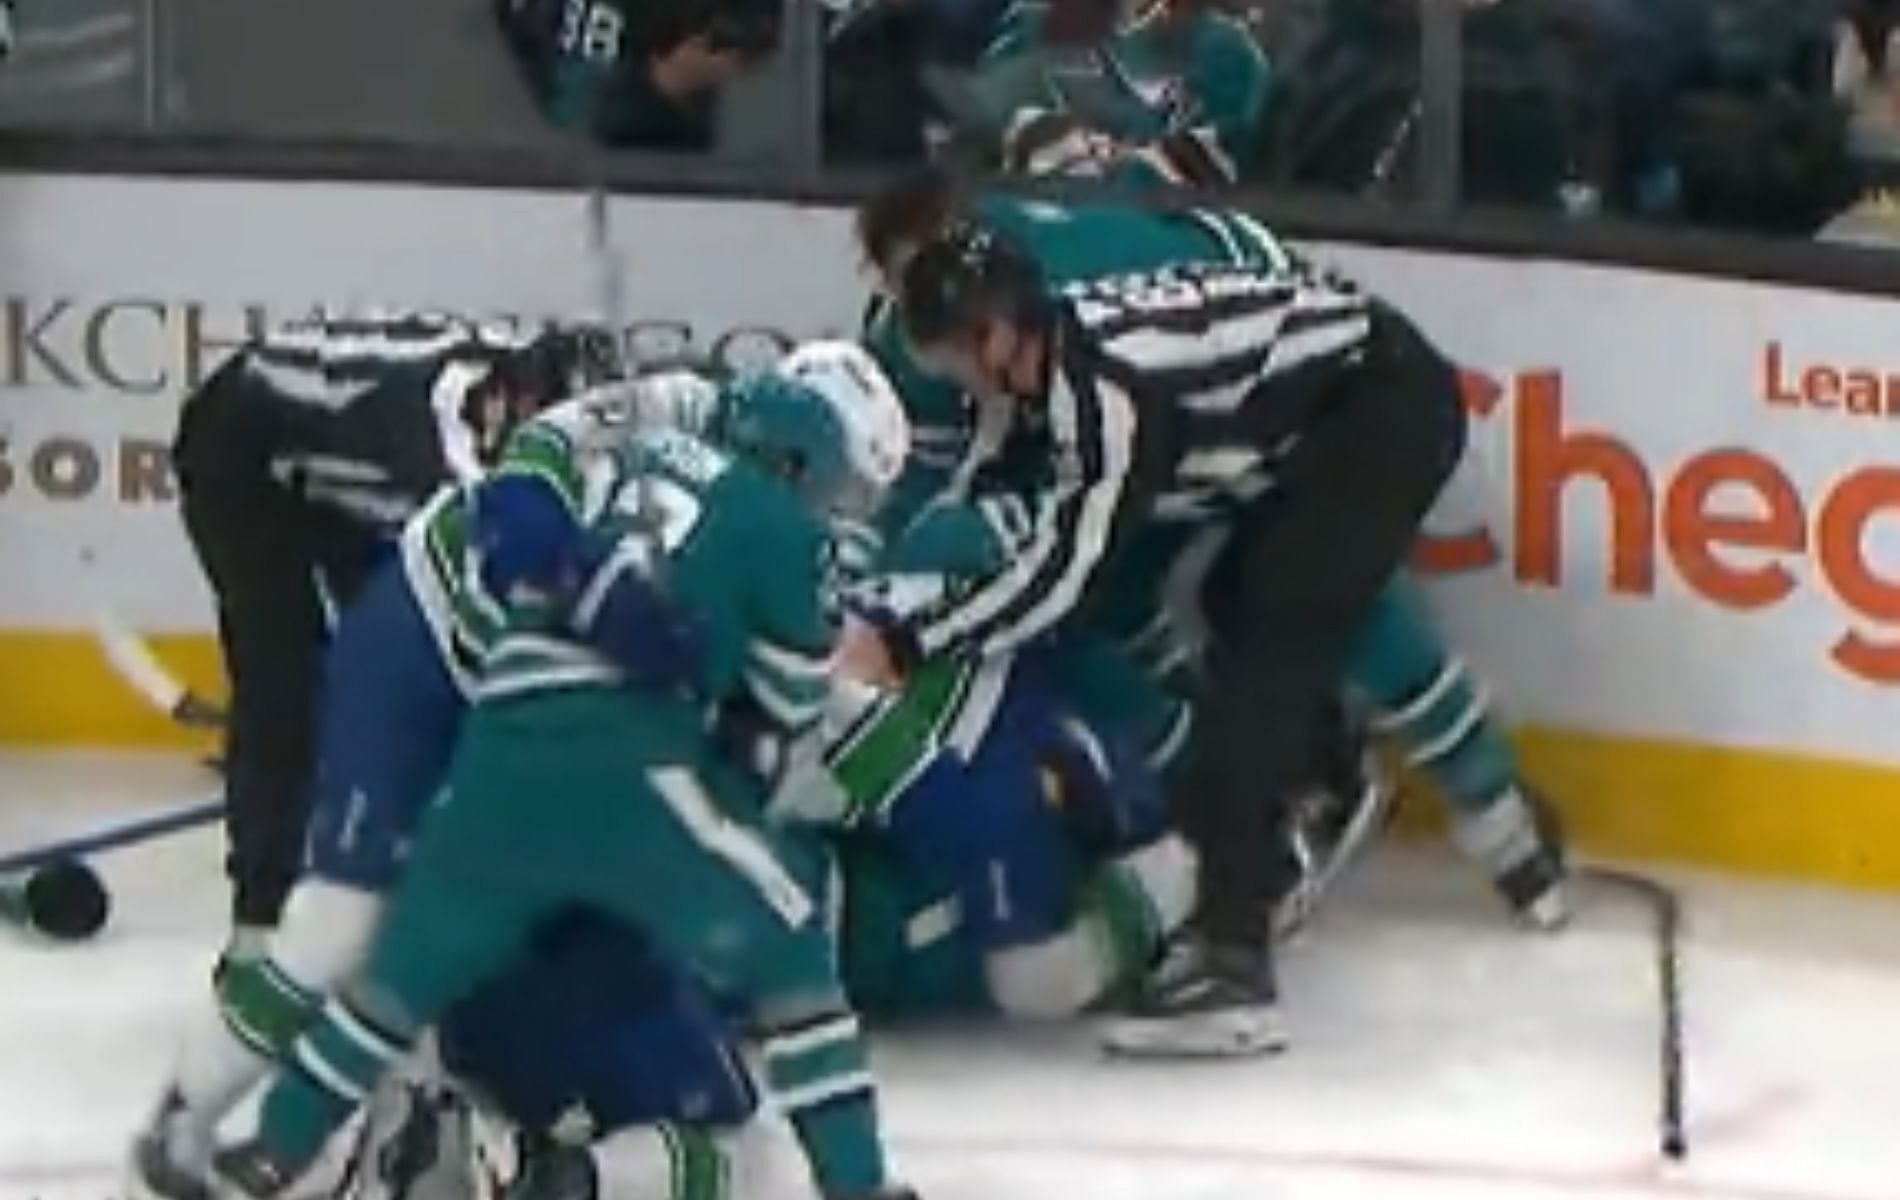 Multiple Vancouver Canucks and San Jose Sharks players involved in fight sparked from big hit by Pettersson